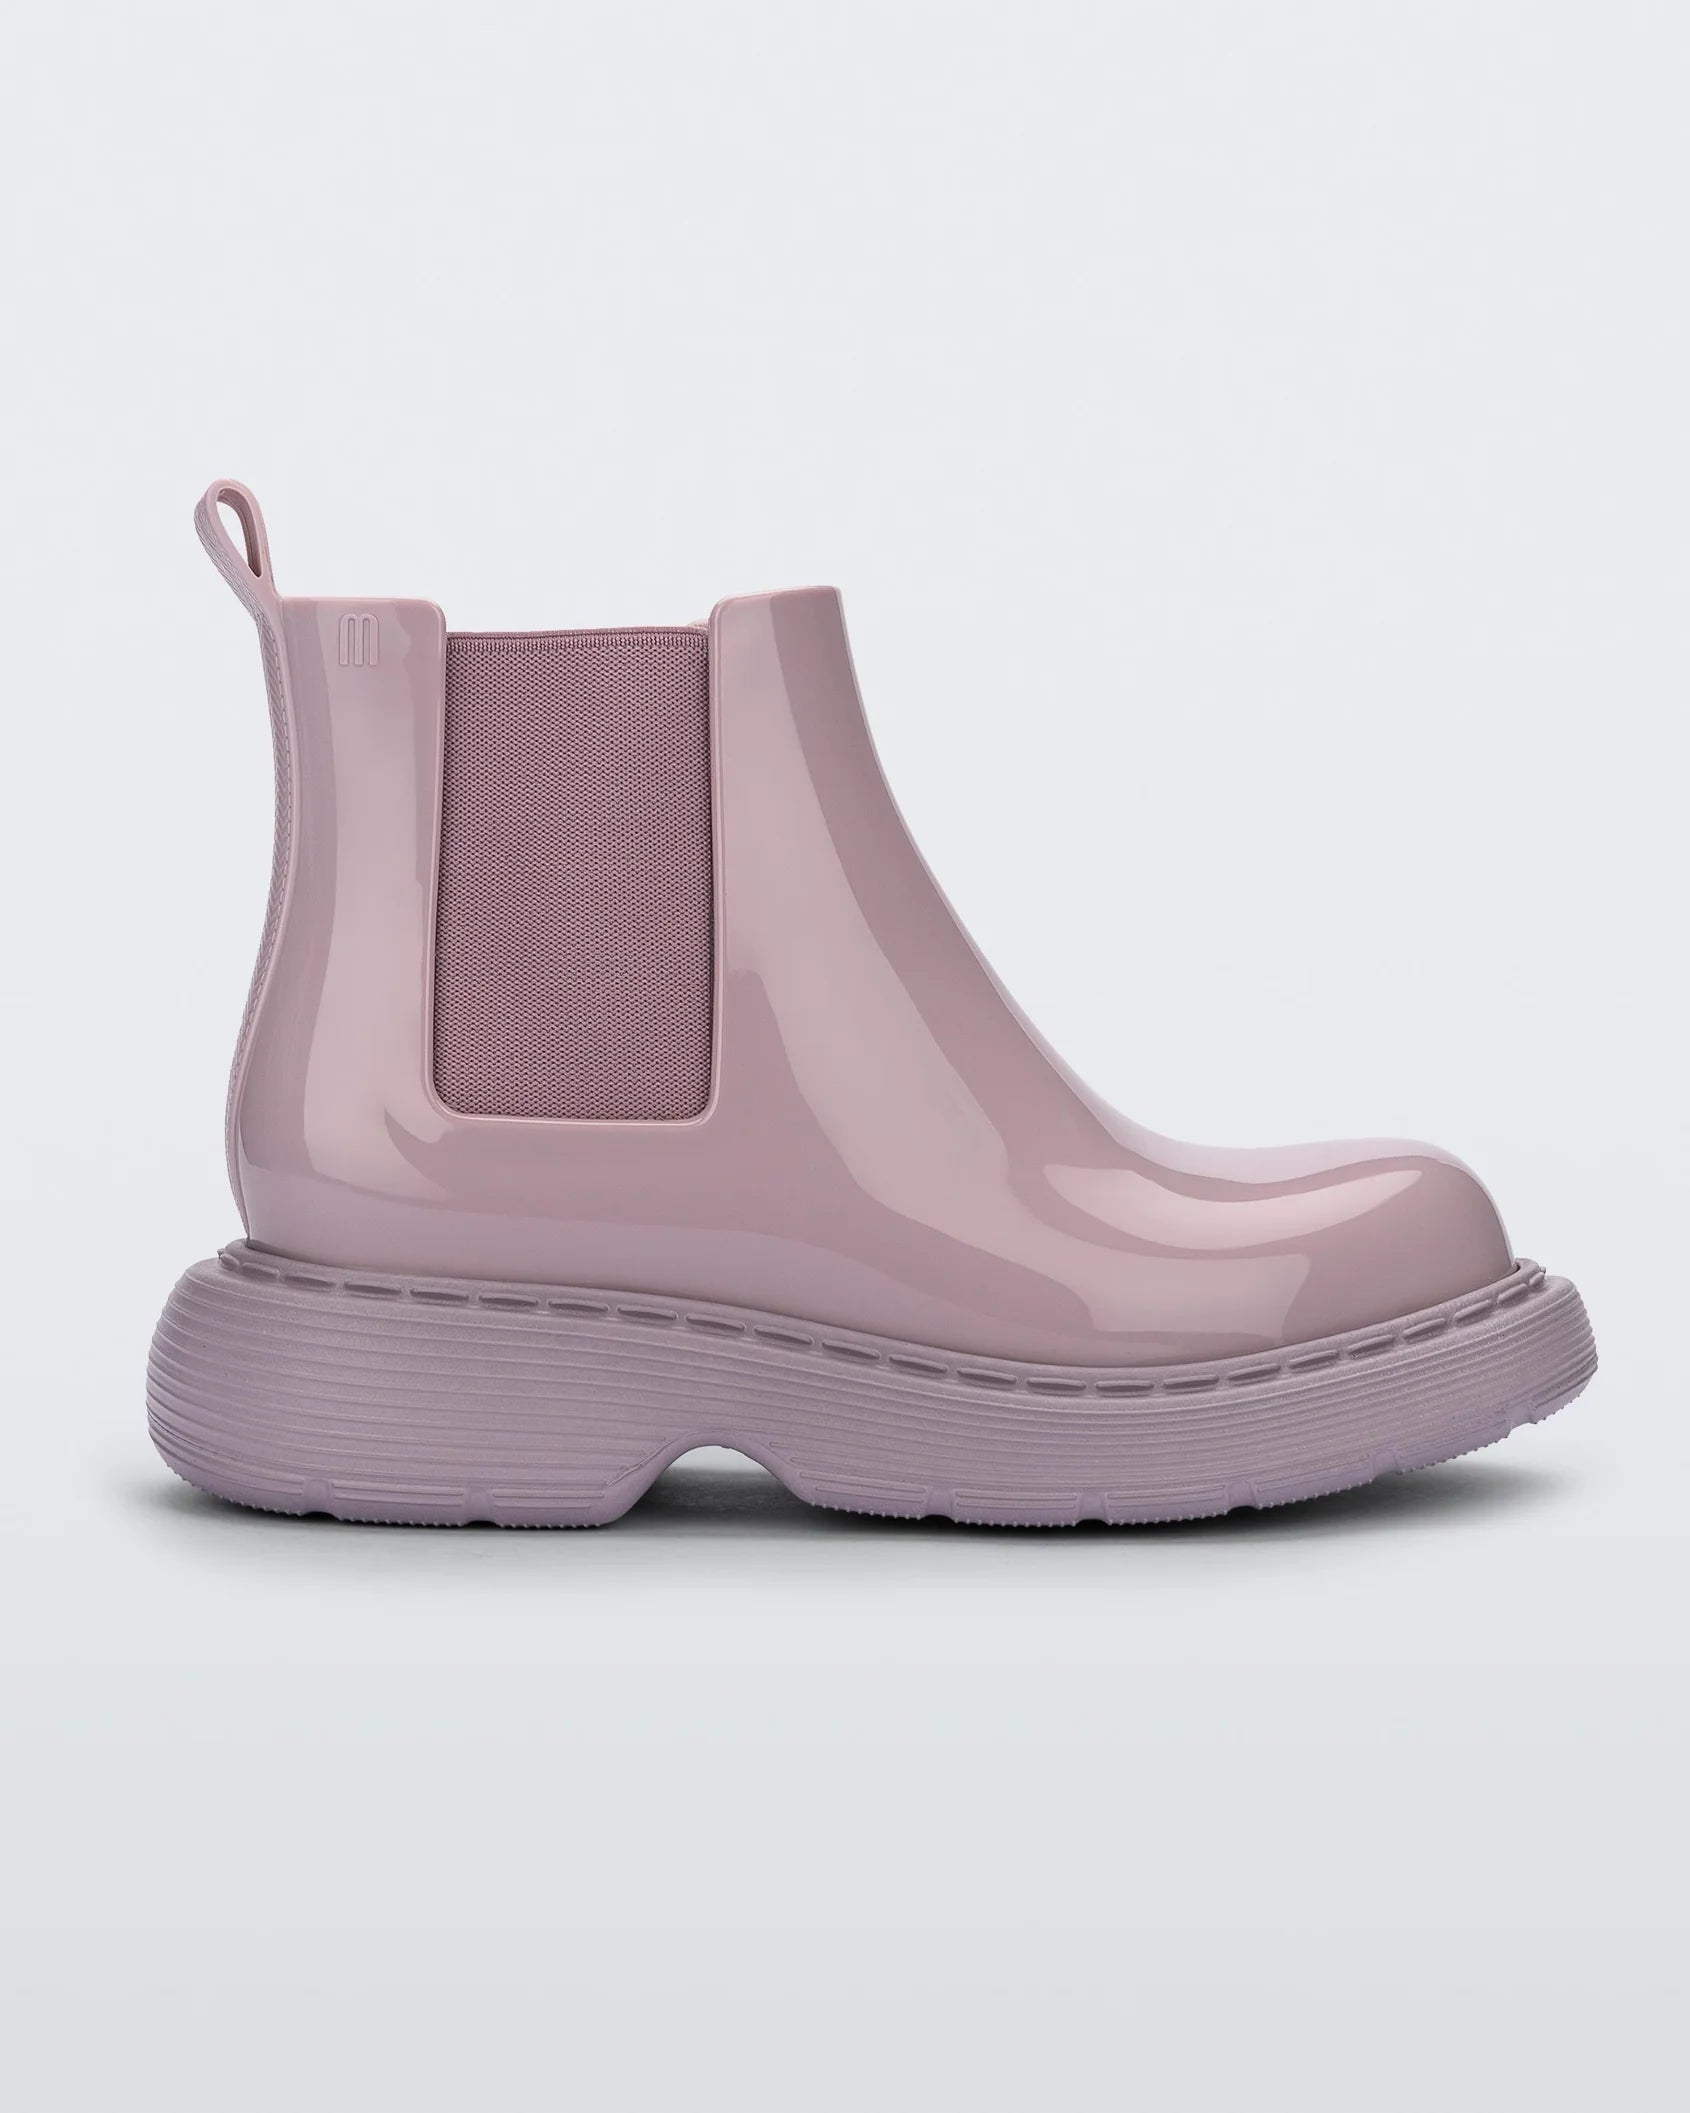 Step boot lilas